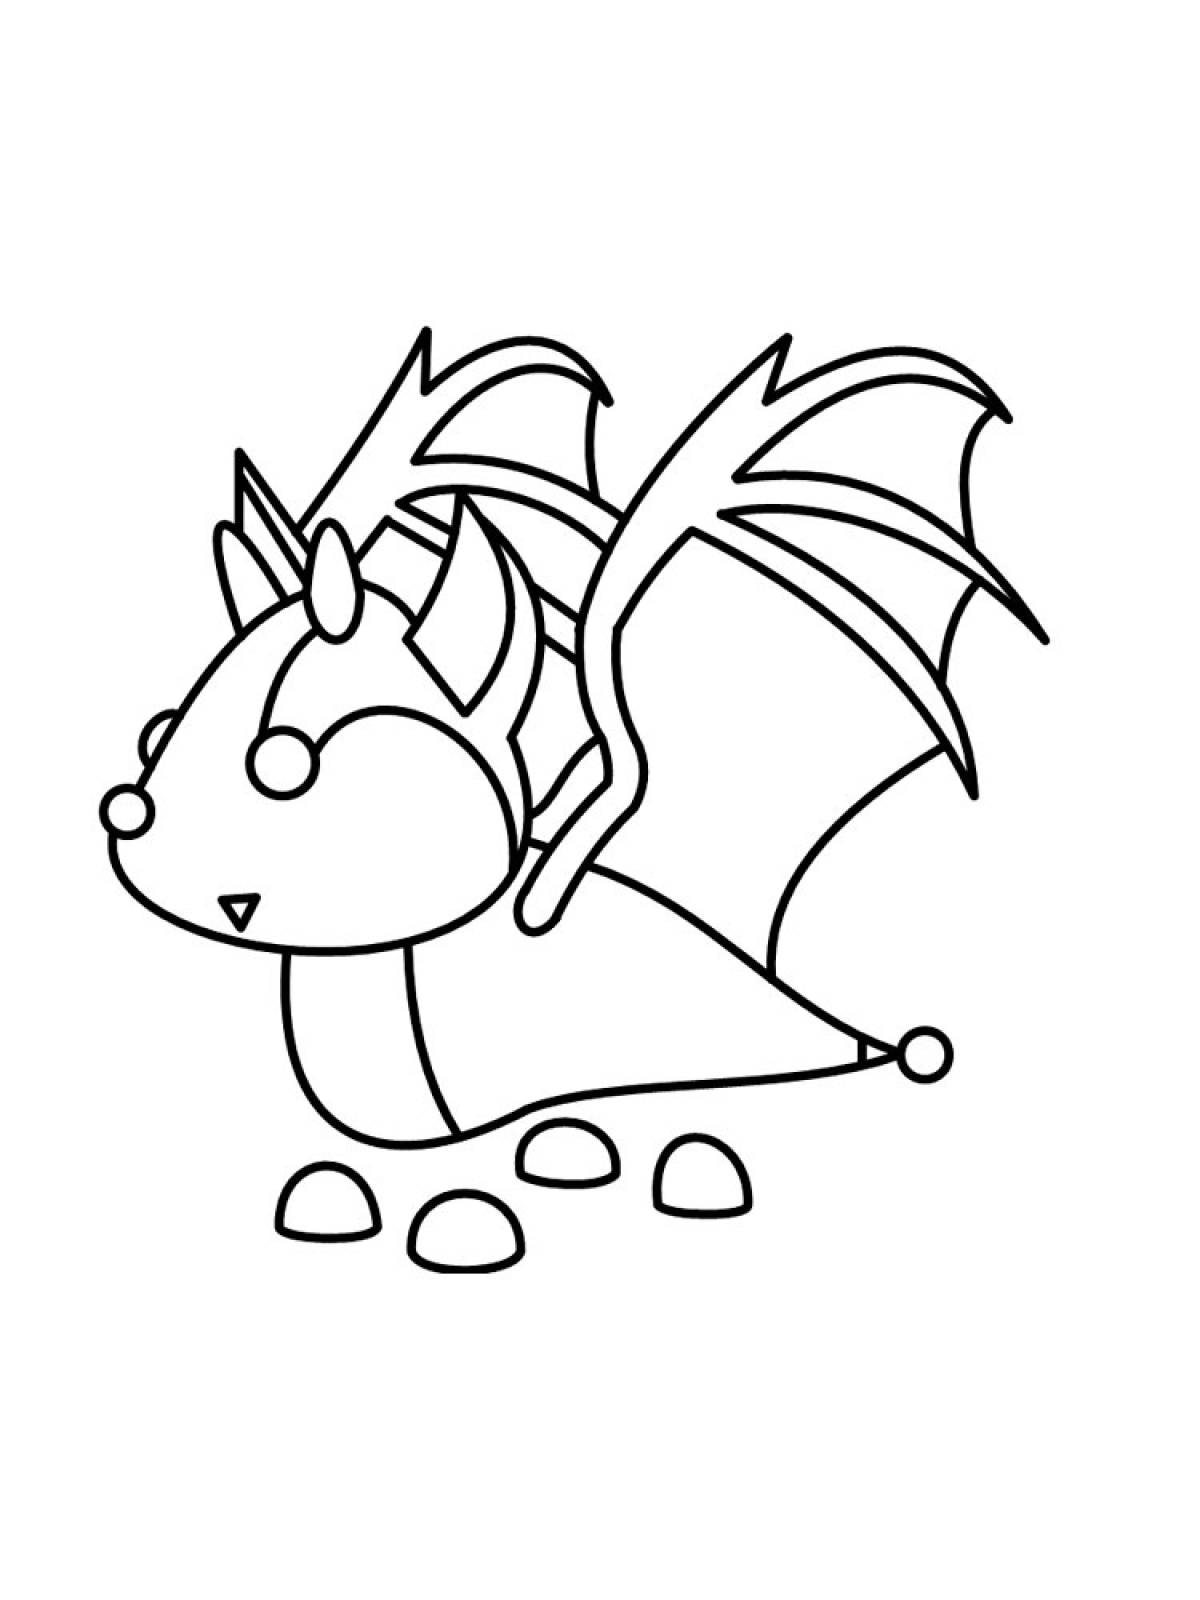 Adopt mi ​​coloring pages